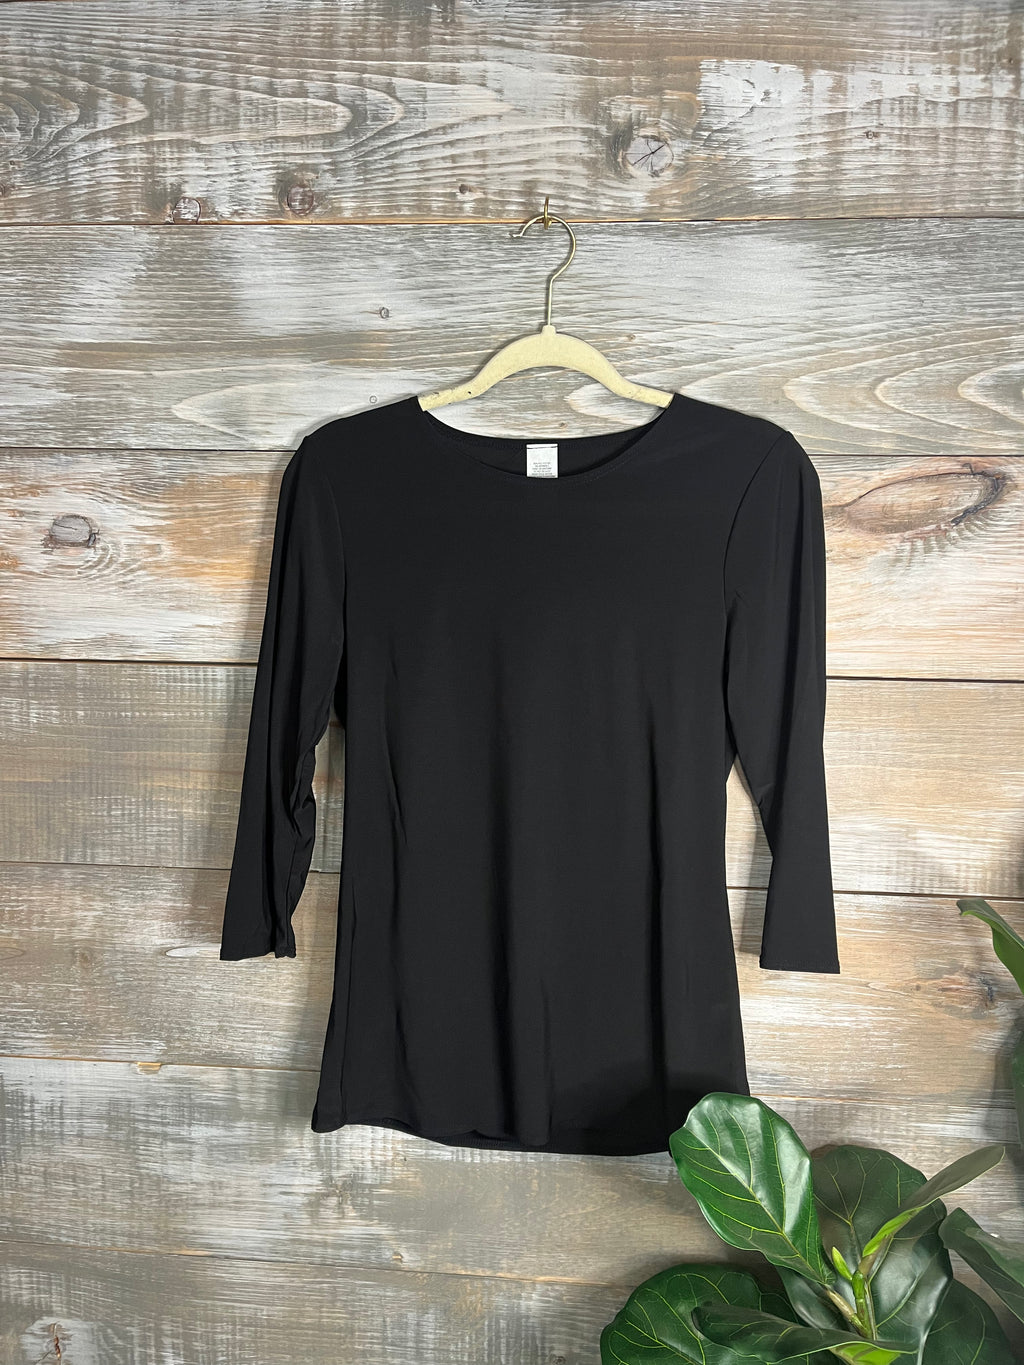 Blessed Bliss 3/4 Sleeve Layering Top